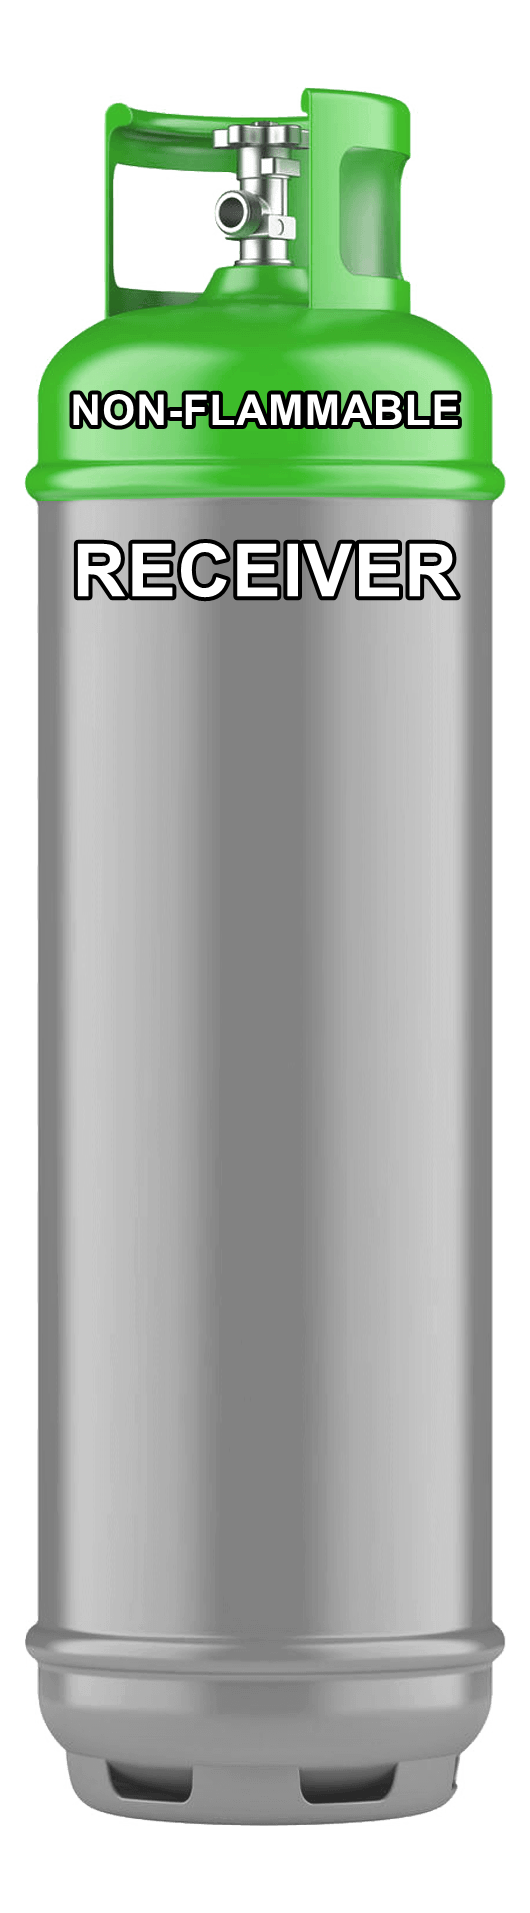 Non-Flammable Gas Receiver/Reclaim Bottle Large Cylinder